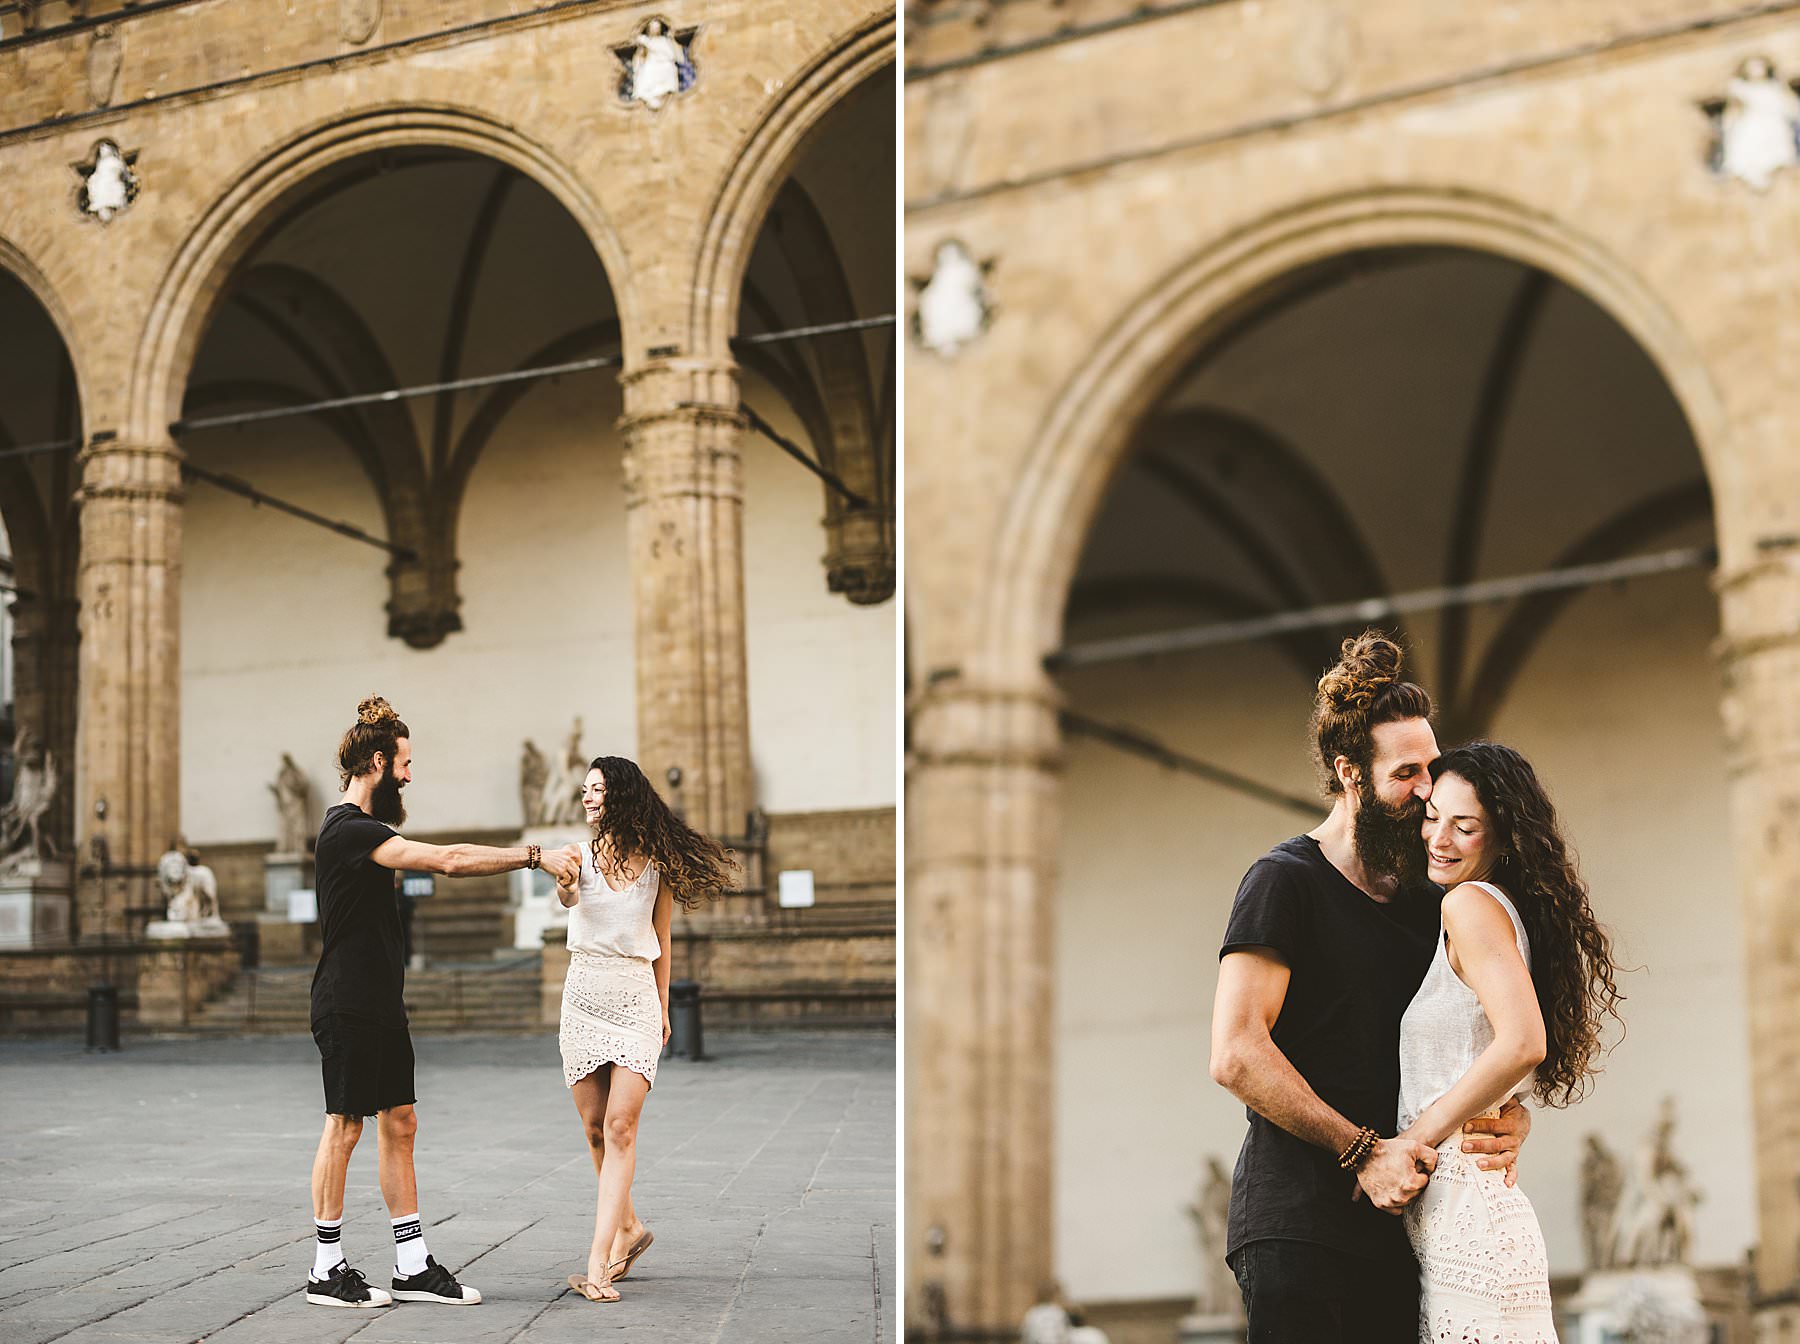 Elegant, tender, and charming early morning Florence couple portrait photo session near Uffizi Museum